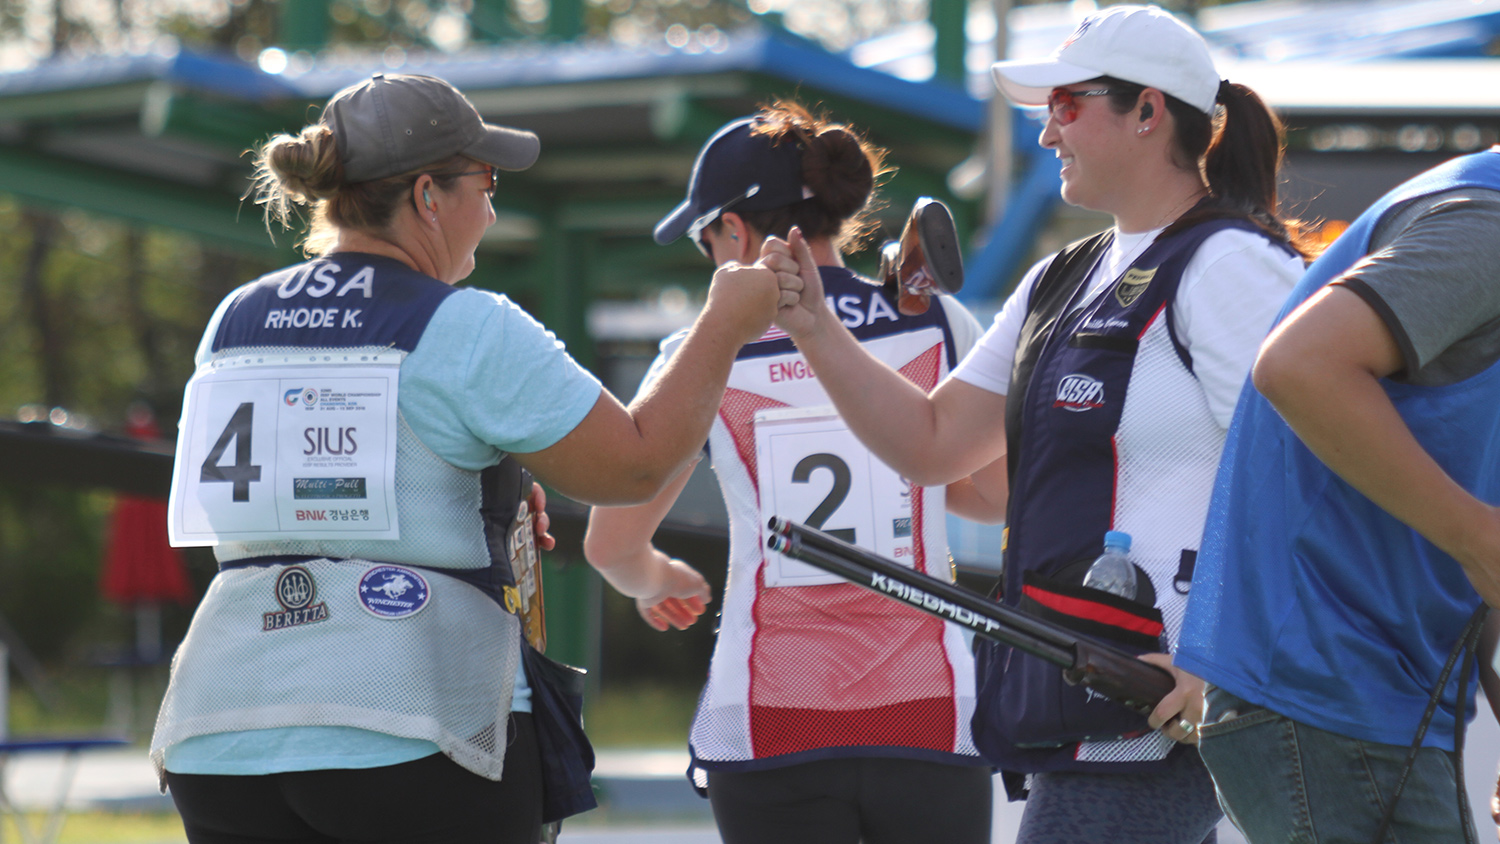 Kim Rhode and Caitlin Connor | 2018 ISSF World Championships, South Korea